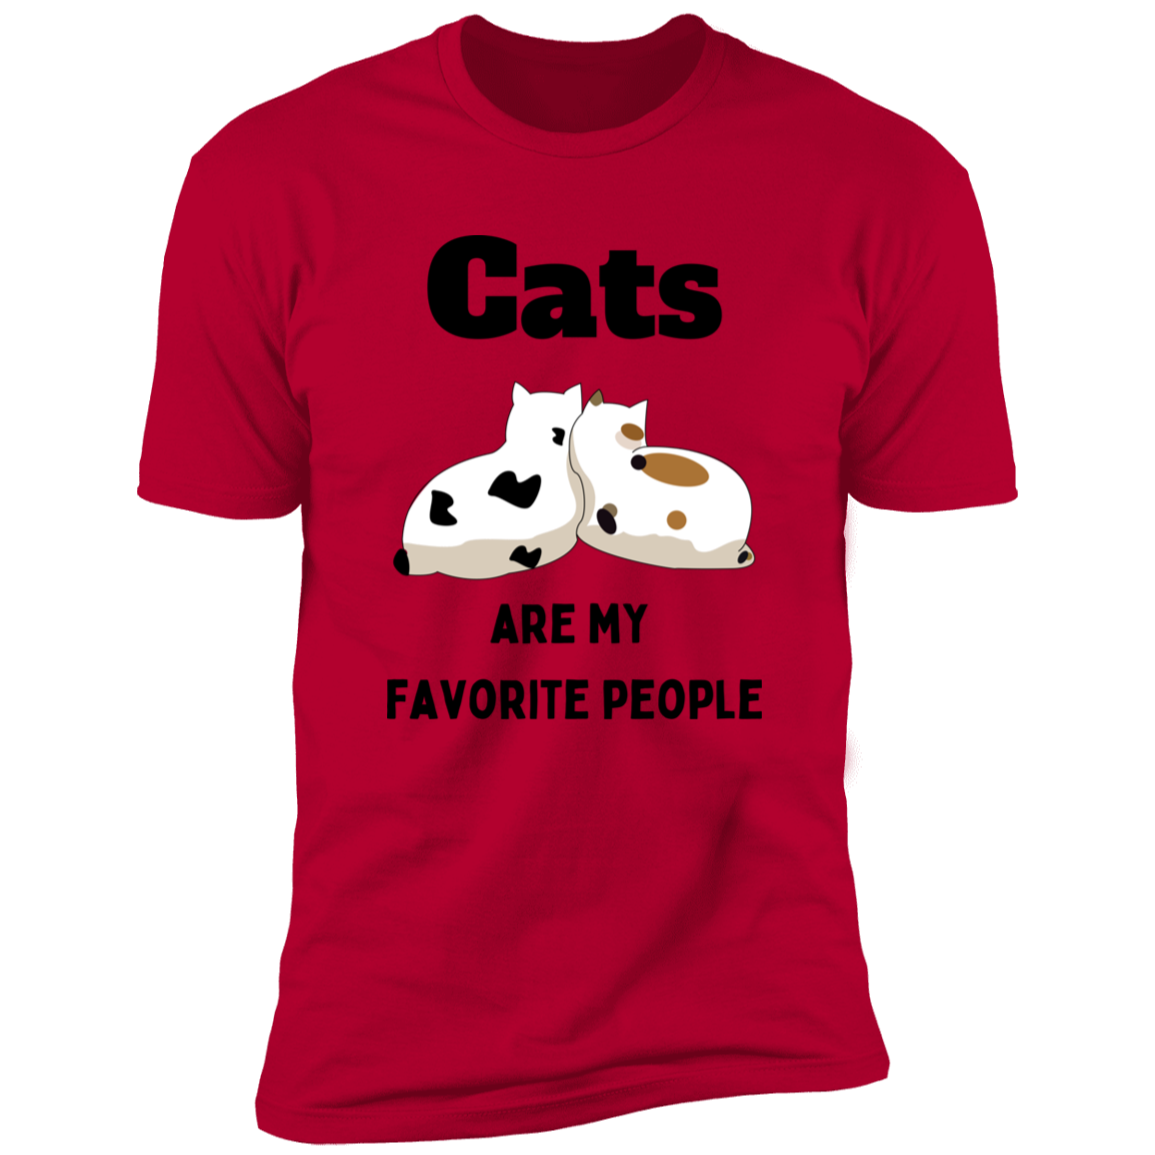 Cats Are My Favorite People T-shirt, Cat Shirt for humans, in red